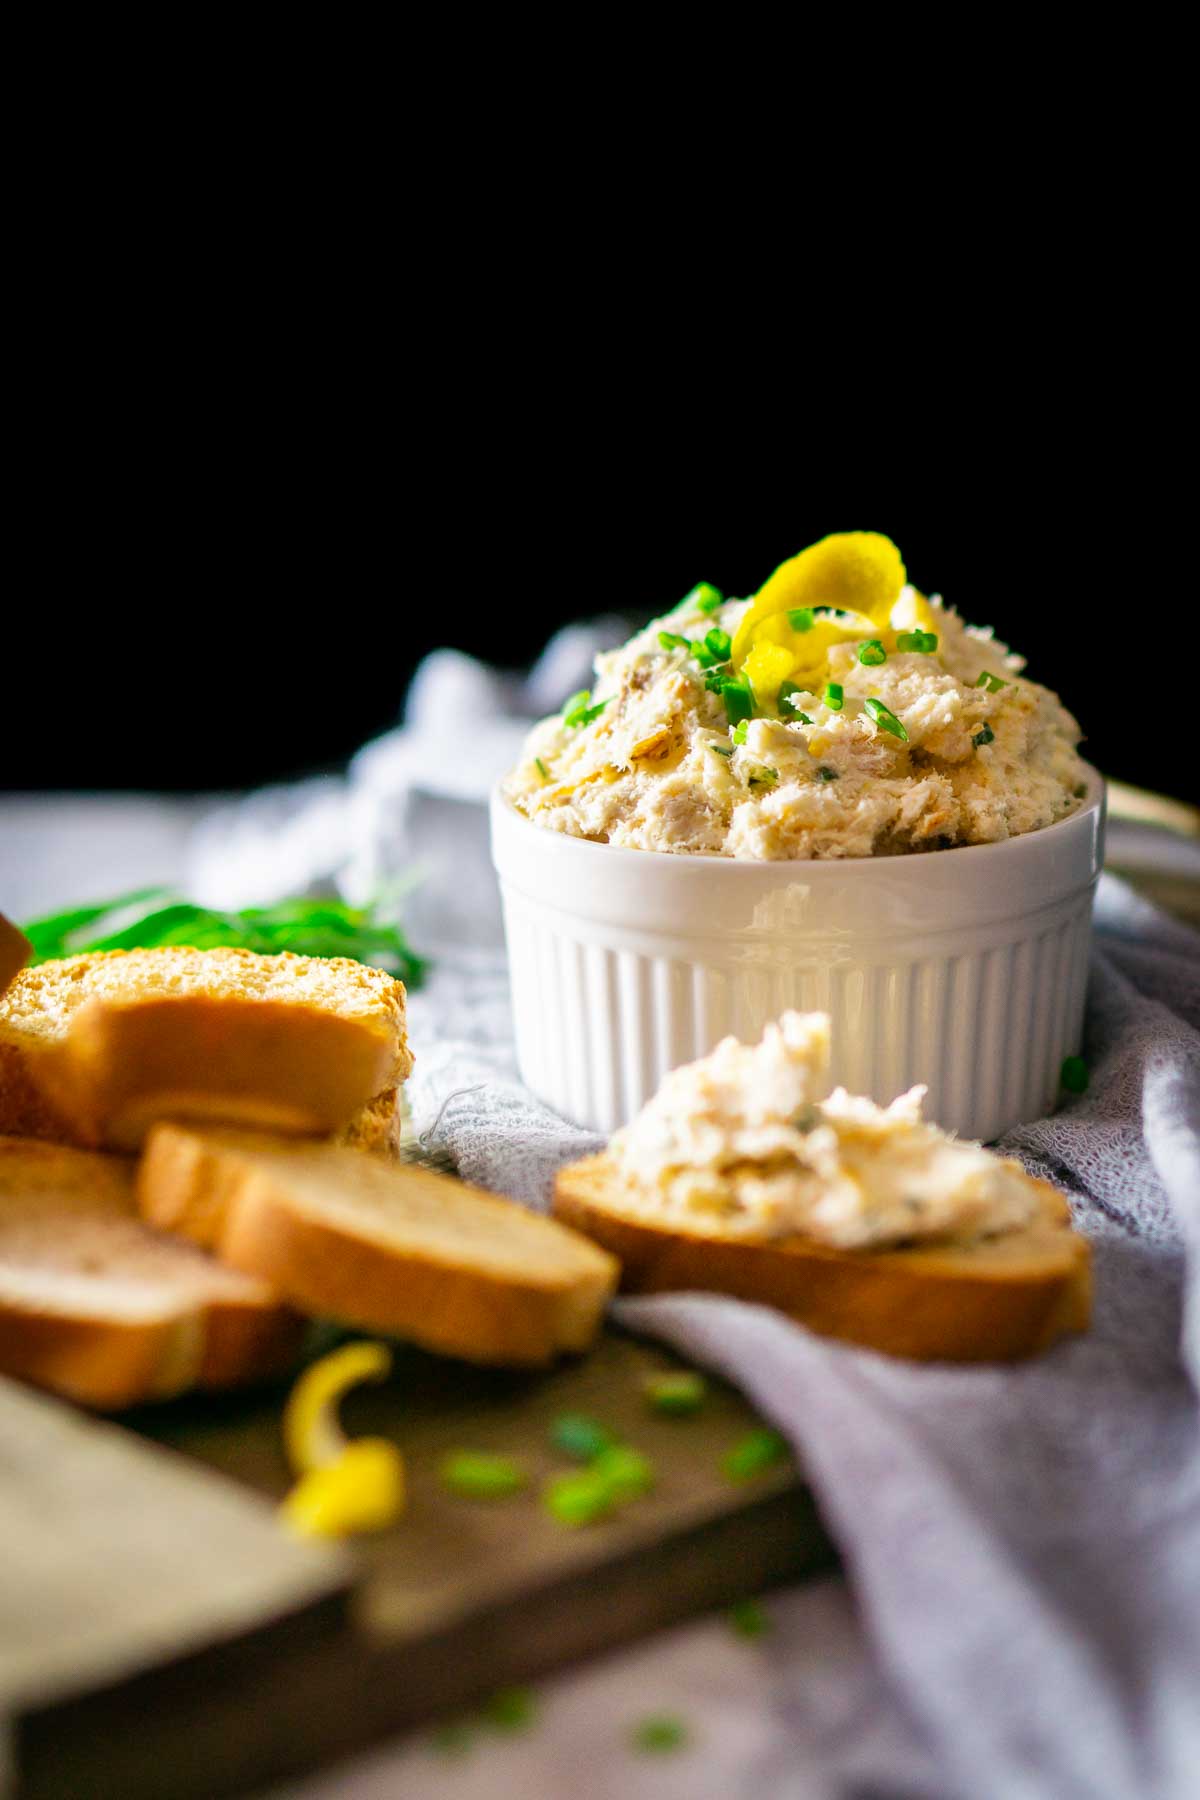 A white ramekin filled with the smoked trout dip against a black background on a wooden tray with lemon peel, chives and crostini.